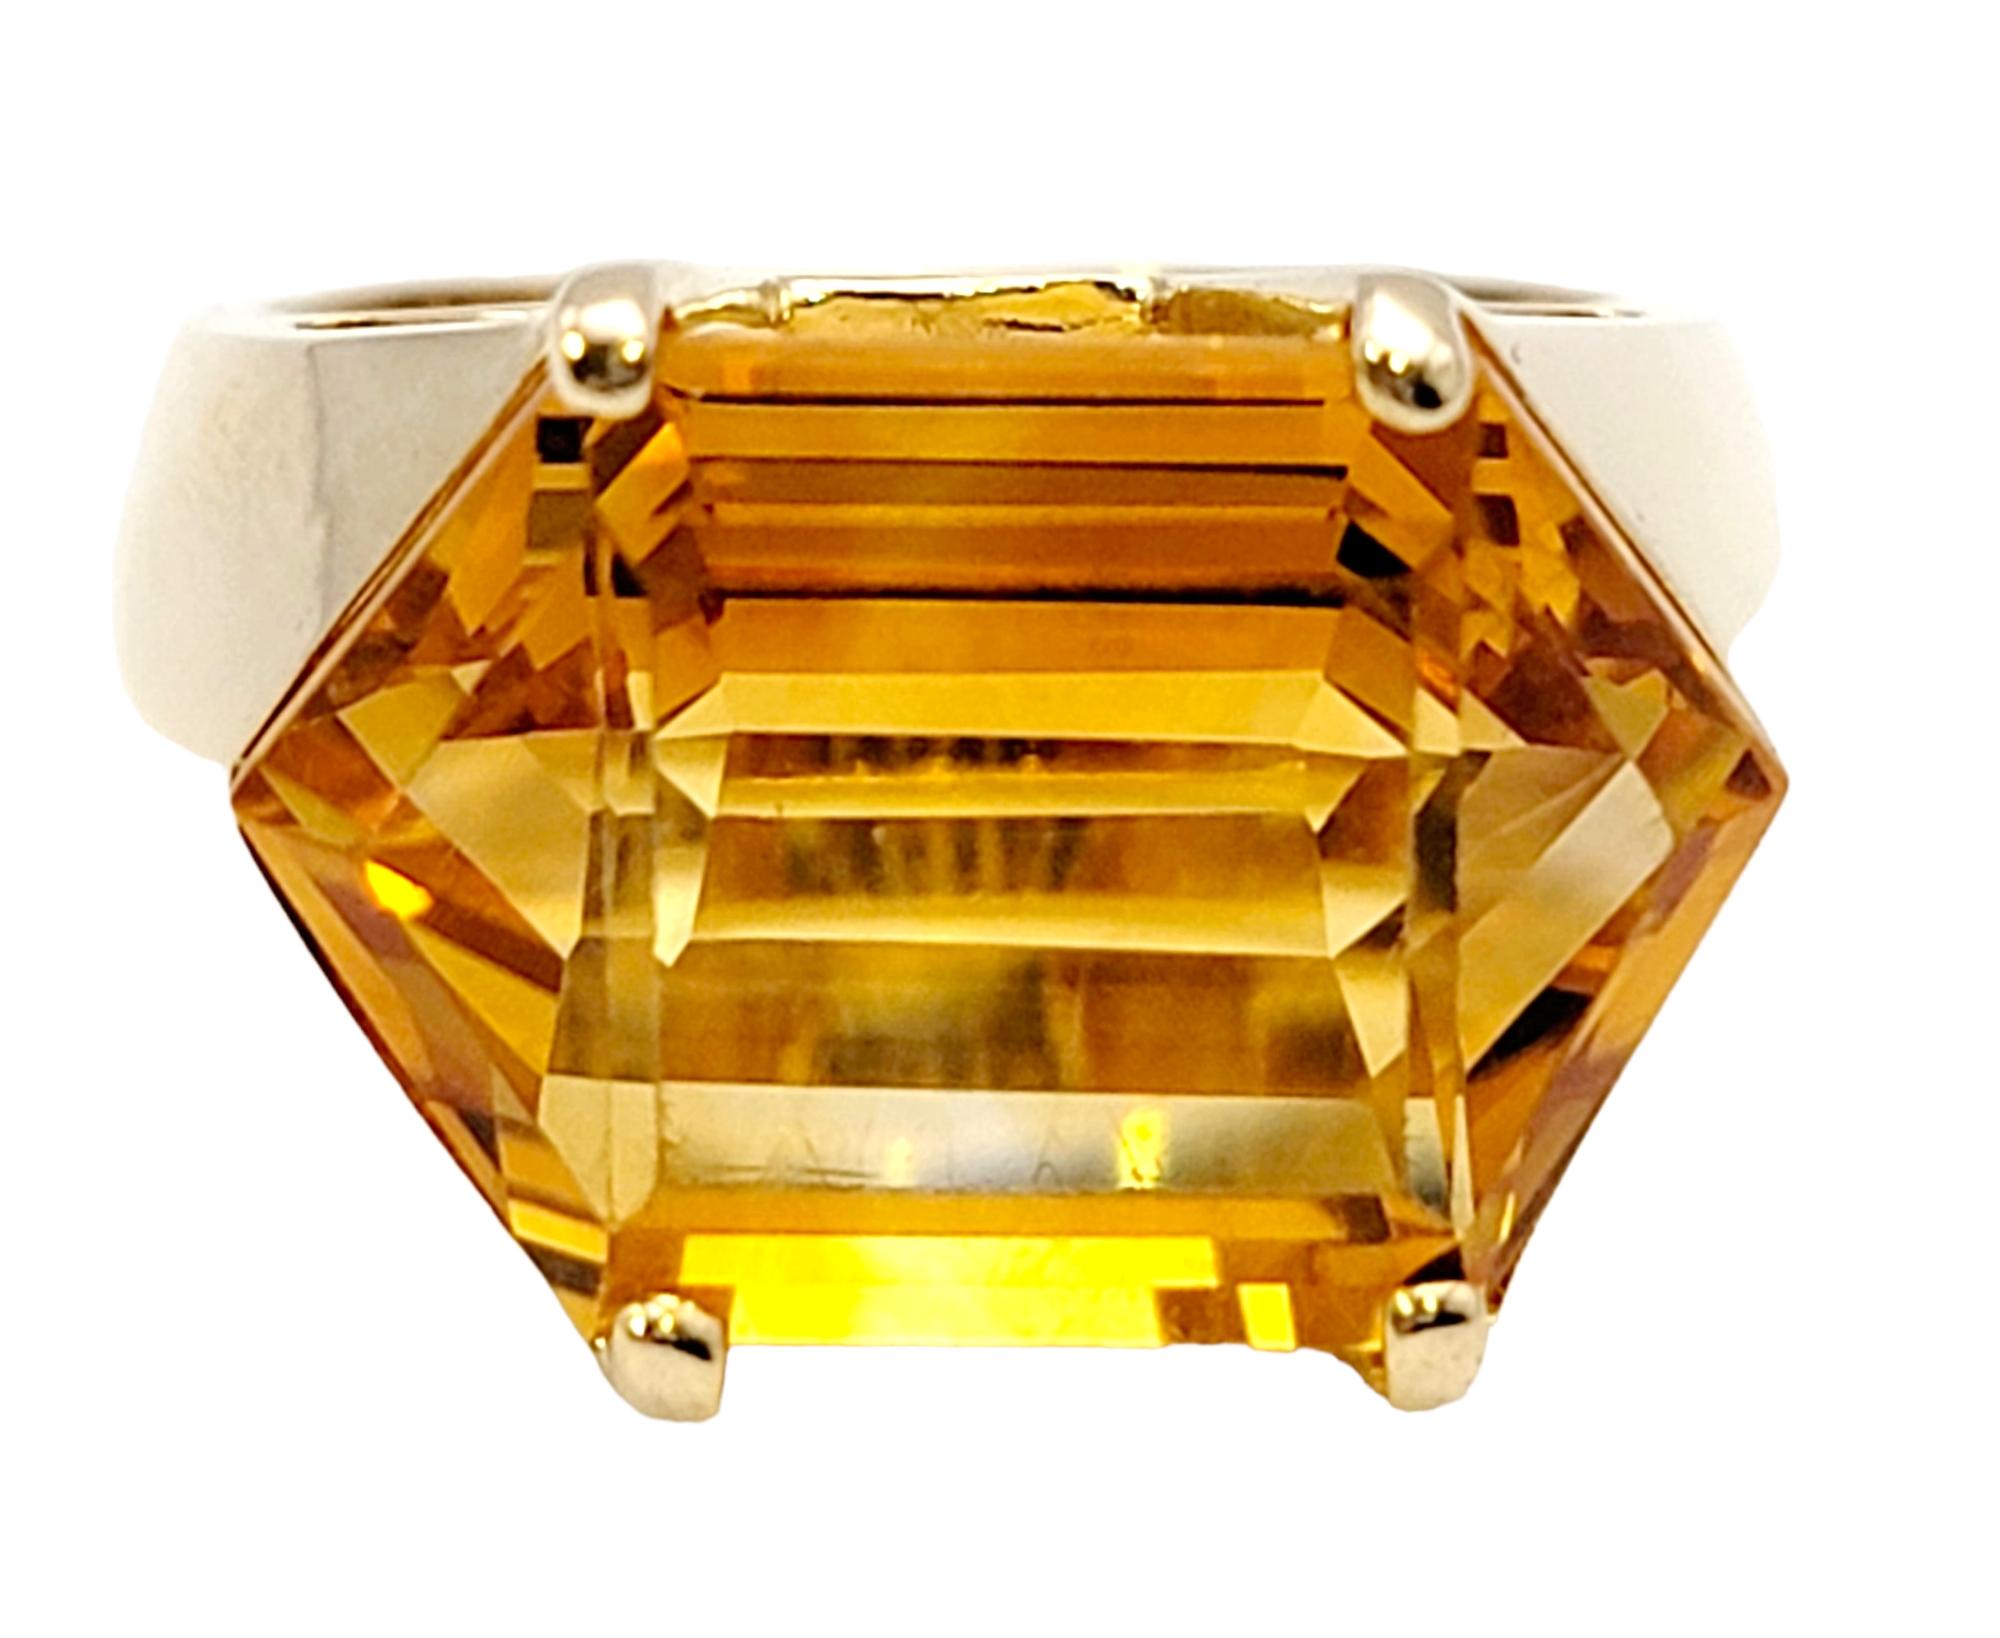 Ring size: 6.75

This contemporary citrine cocktail ring will make your finger absolutely glow. This chic, modern piece makes a sophisticated statement with its unique shape and rich, warm color. The incredible hexagonal cut citrine stone is 4 prong